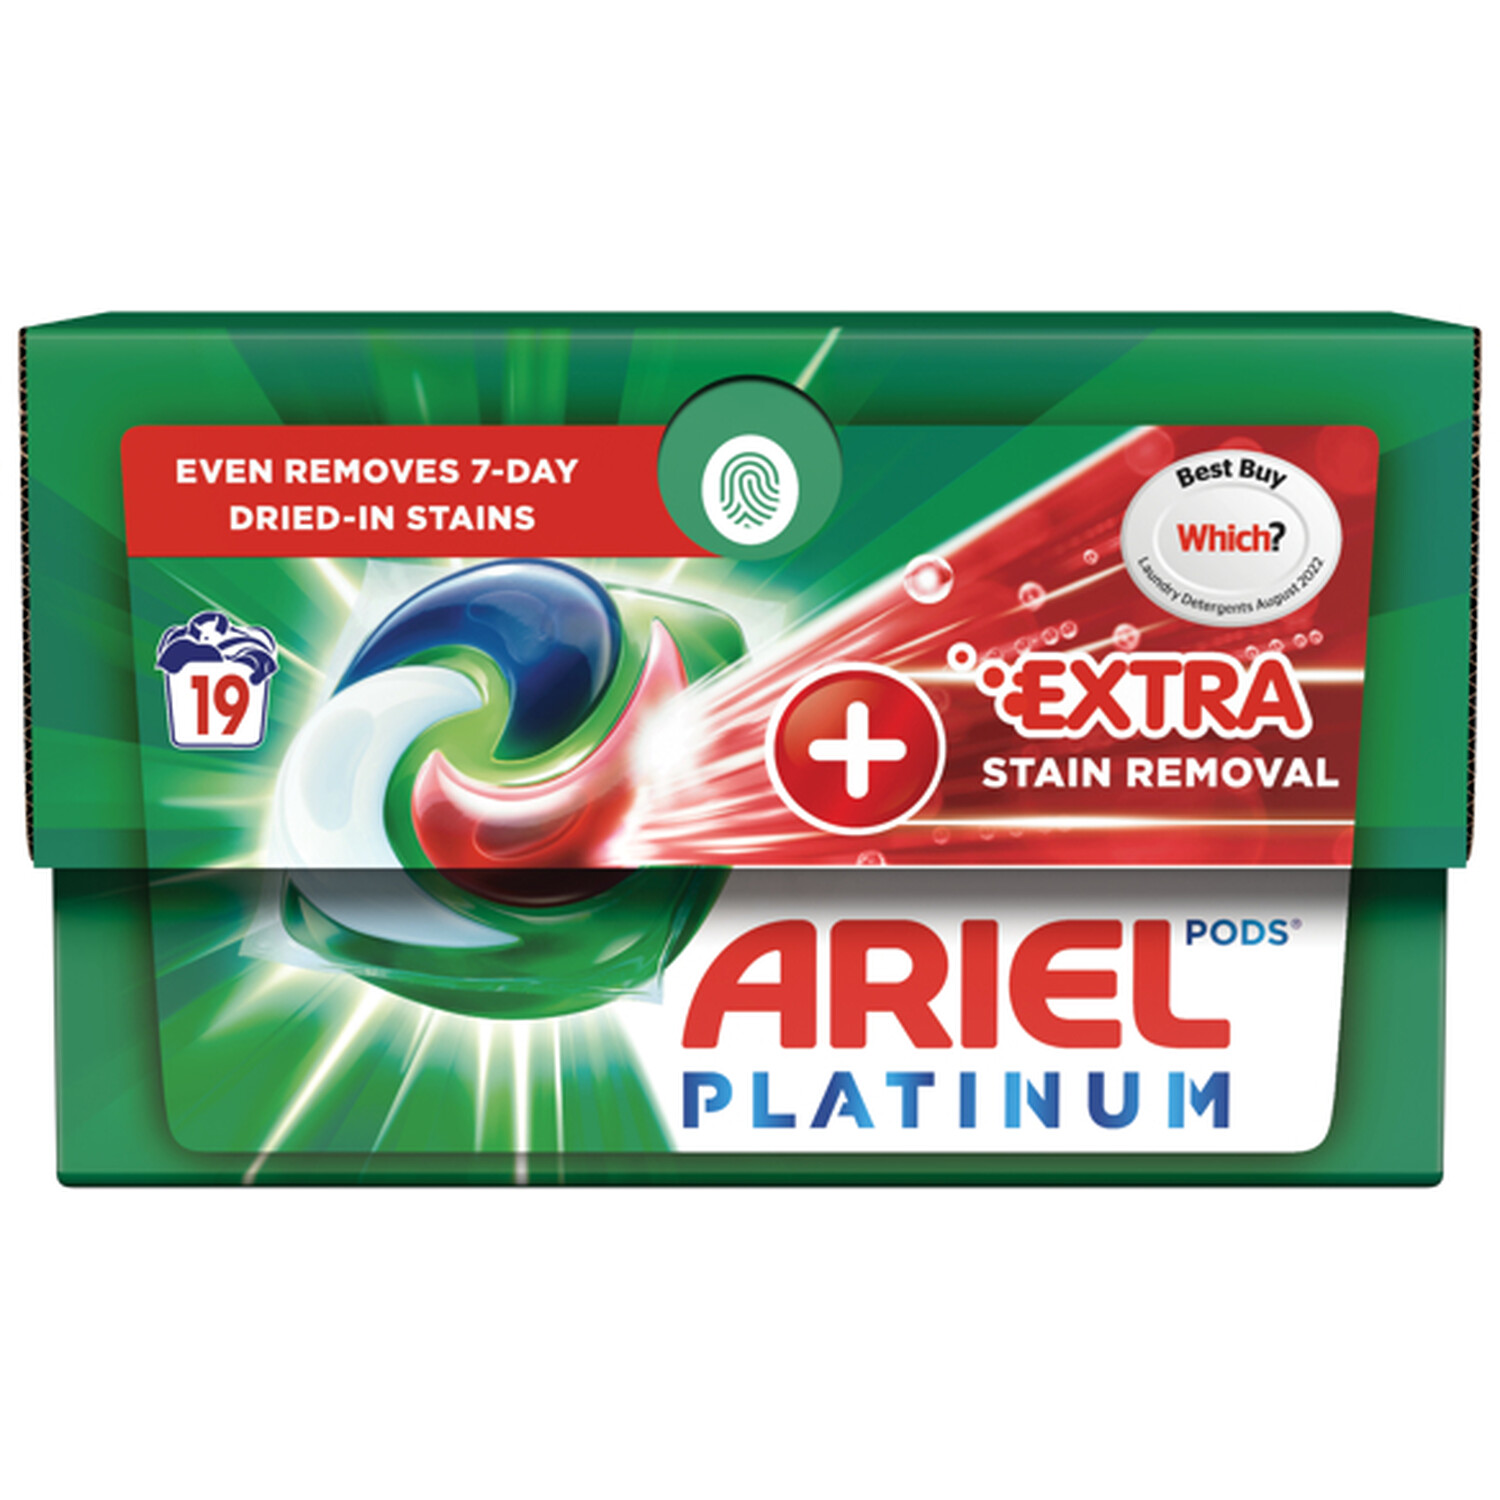 Ariel Platinum Stain Remover Pods 19 Washes Image